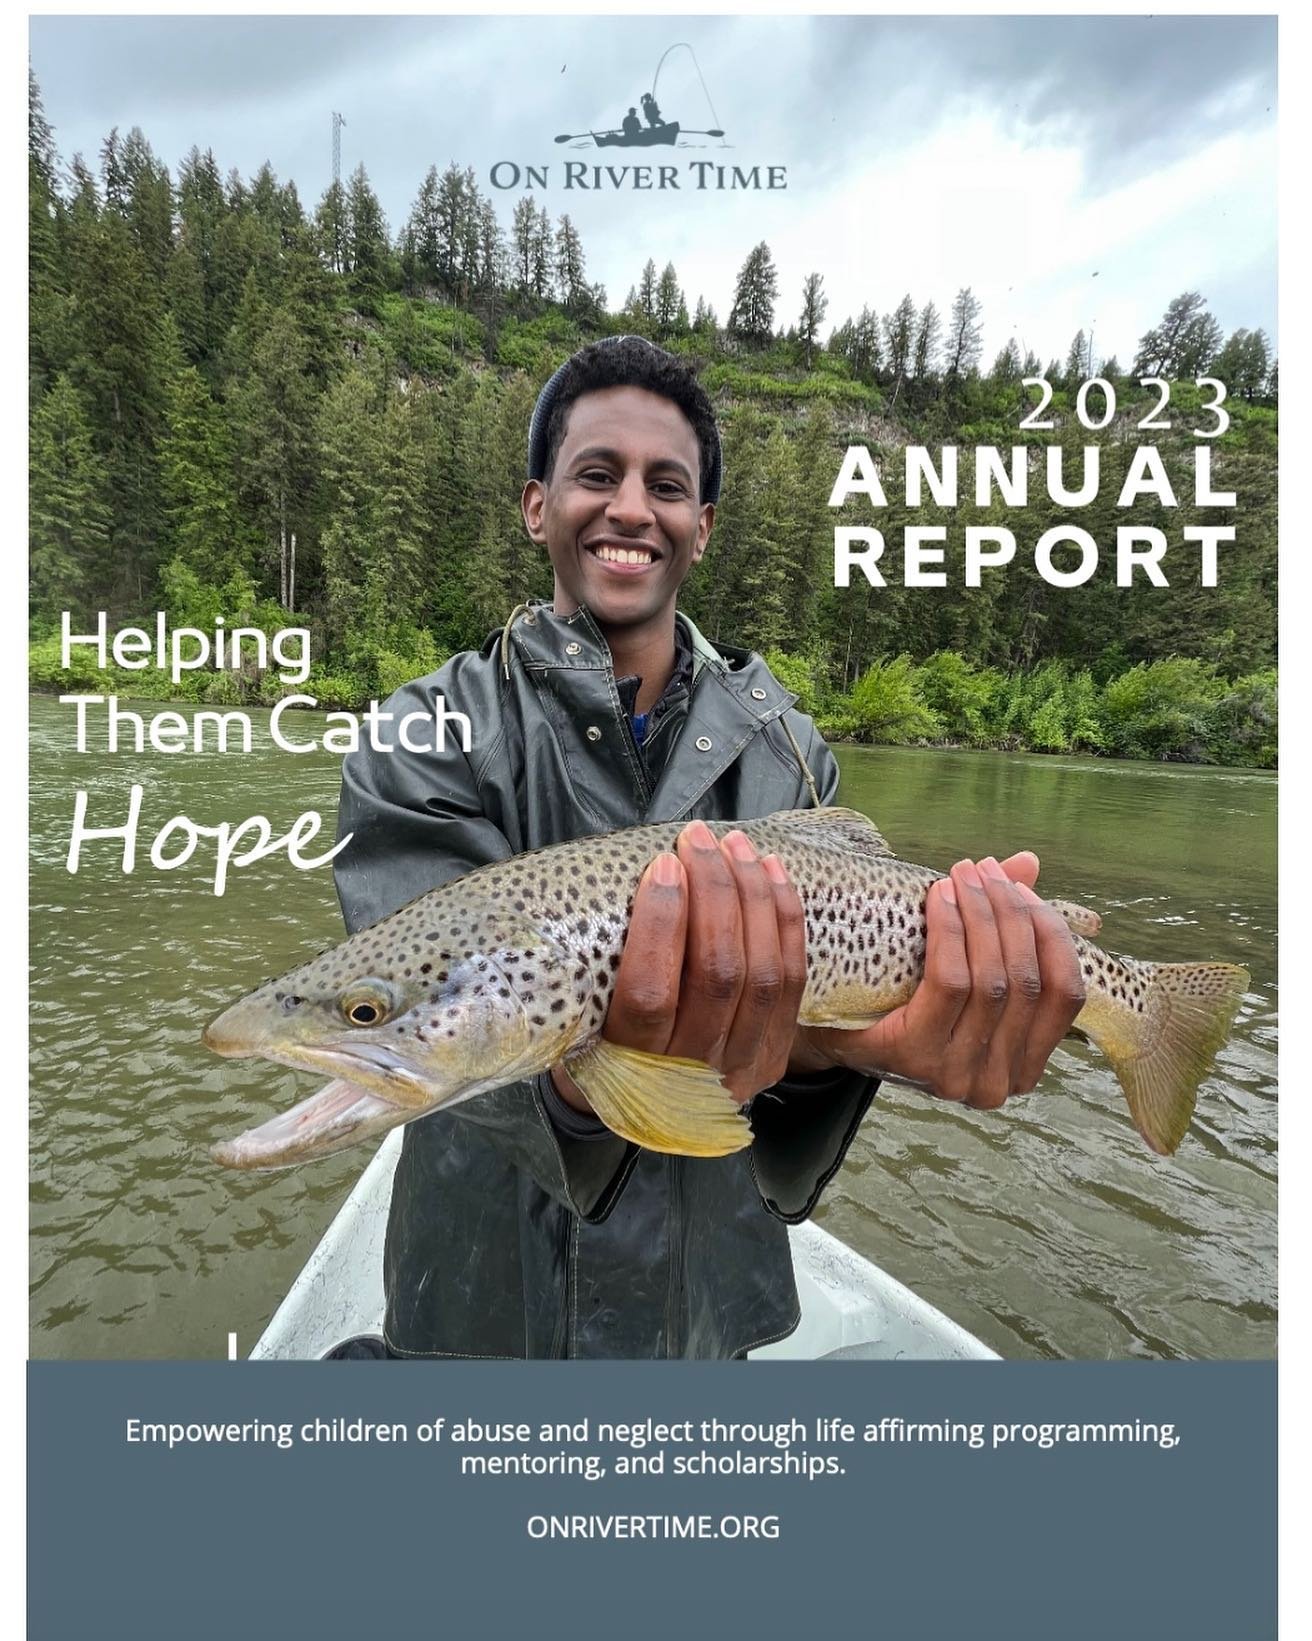 Our 2023 Annual Report is ready!
We hope you will take a few moments to review. It includes our financials as well as all of the ways your partnership helped to make a real and lasting difference in the lives of the young people we serve.
Thank YOU!!